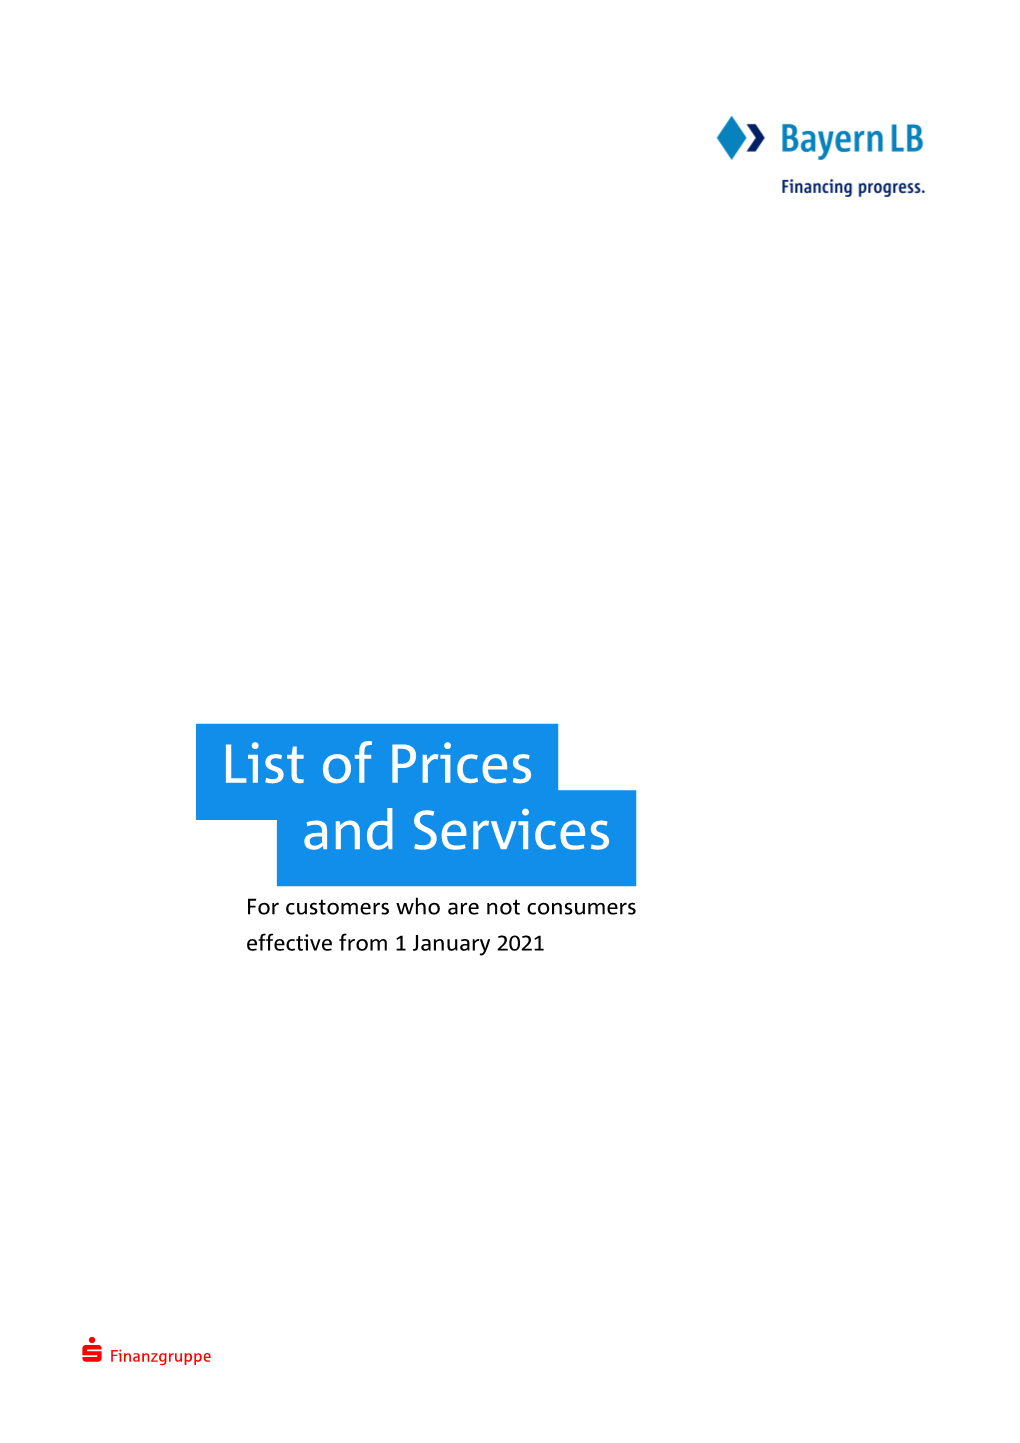 List of Prices and Services